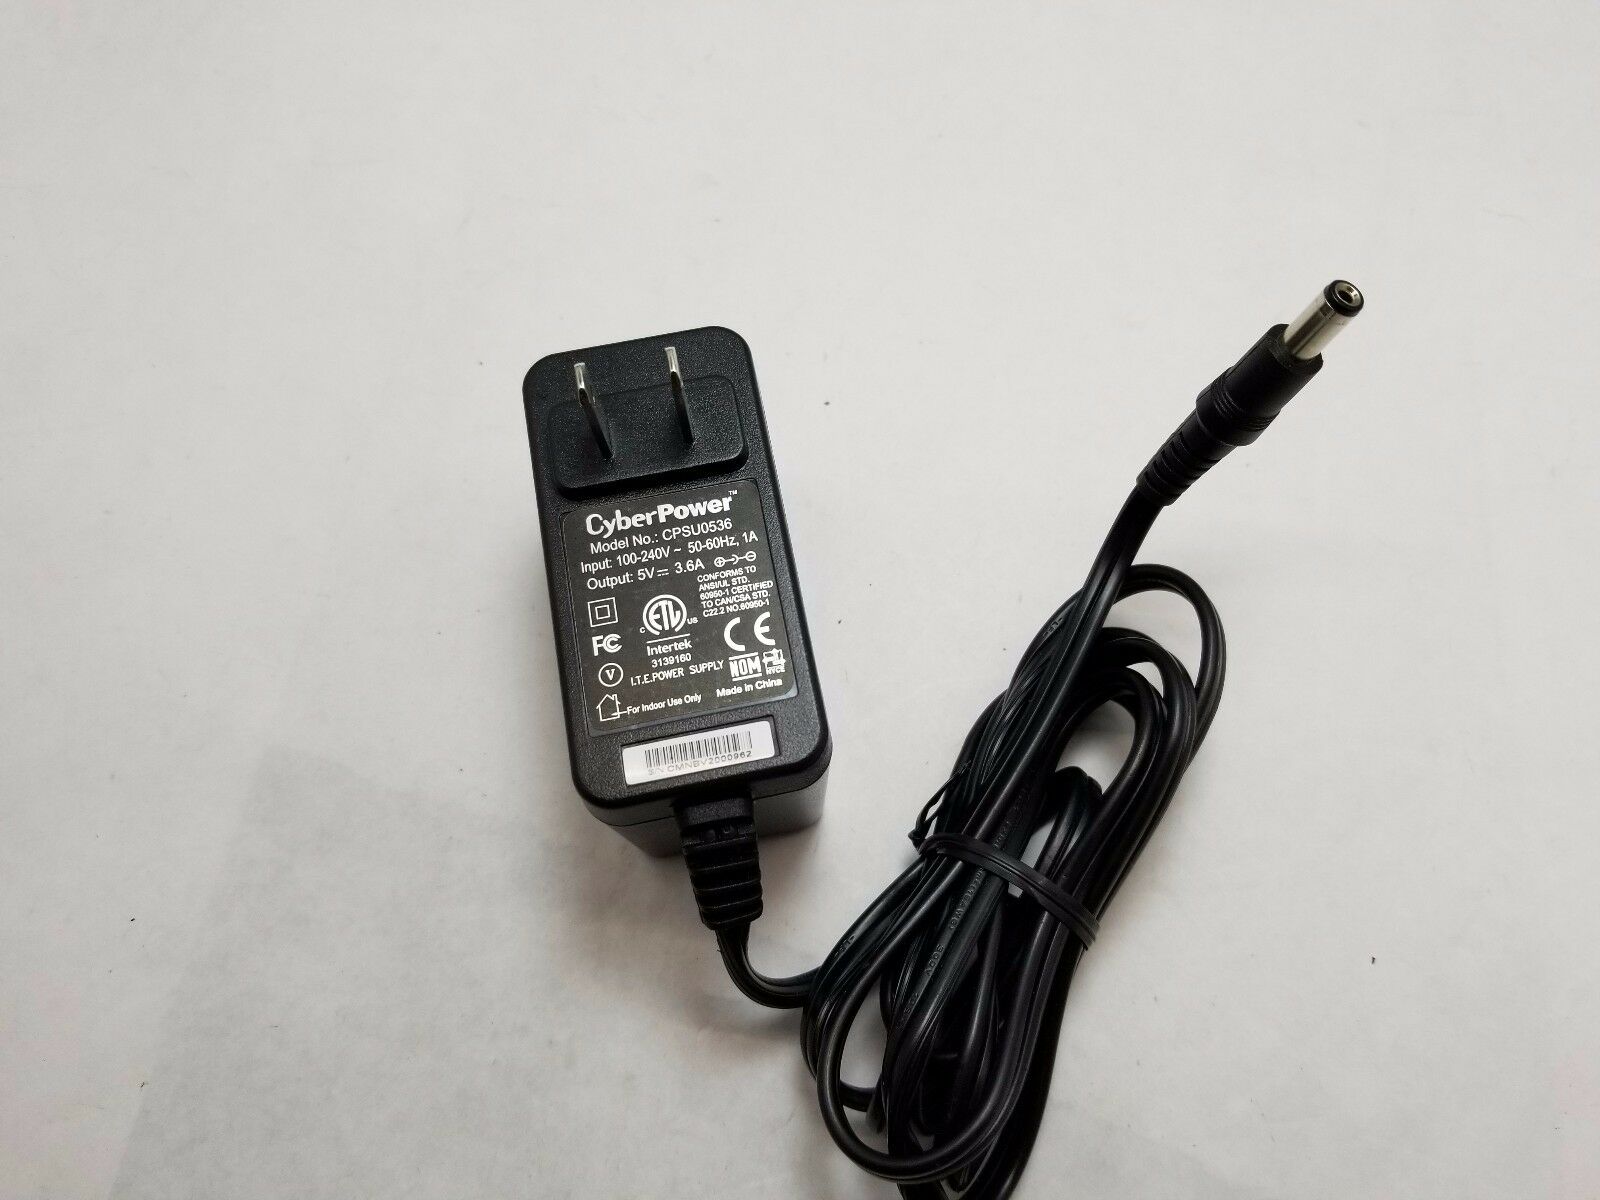 Genuine Cyberpower AC Power Adapter 5V 3.6A CPSU0536 Output Voltage(s): 5V Type: AC/Standard MPN: CPSU0536 Brand: - Click Image to Close